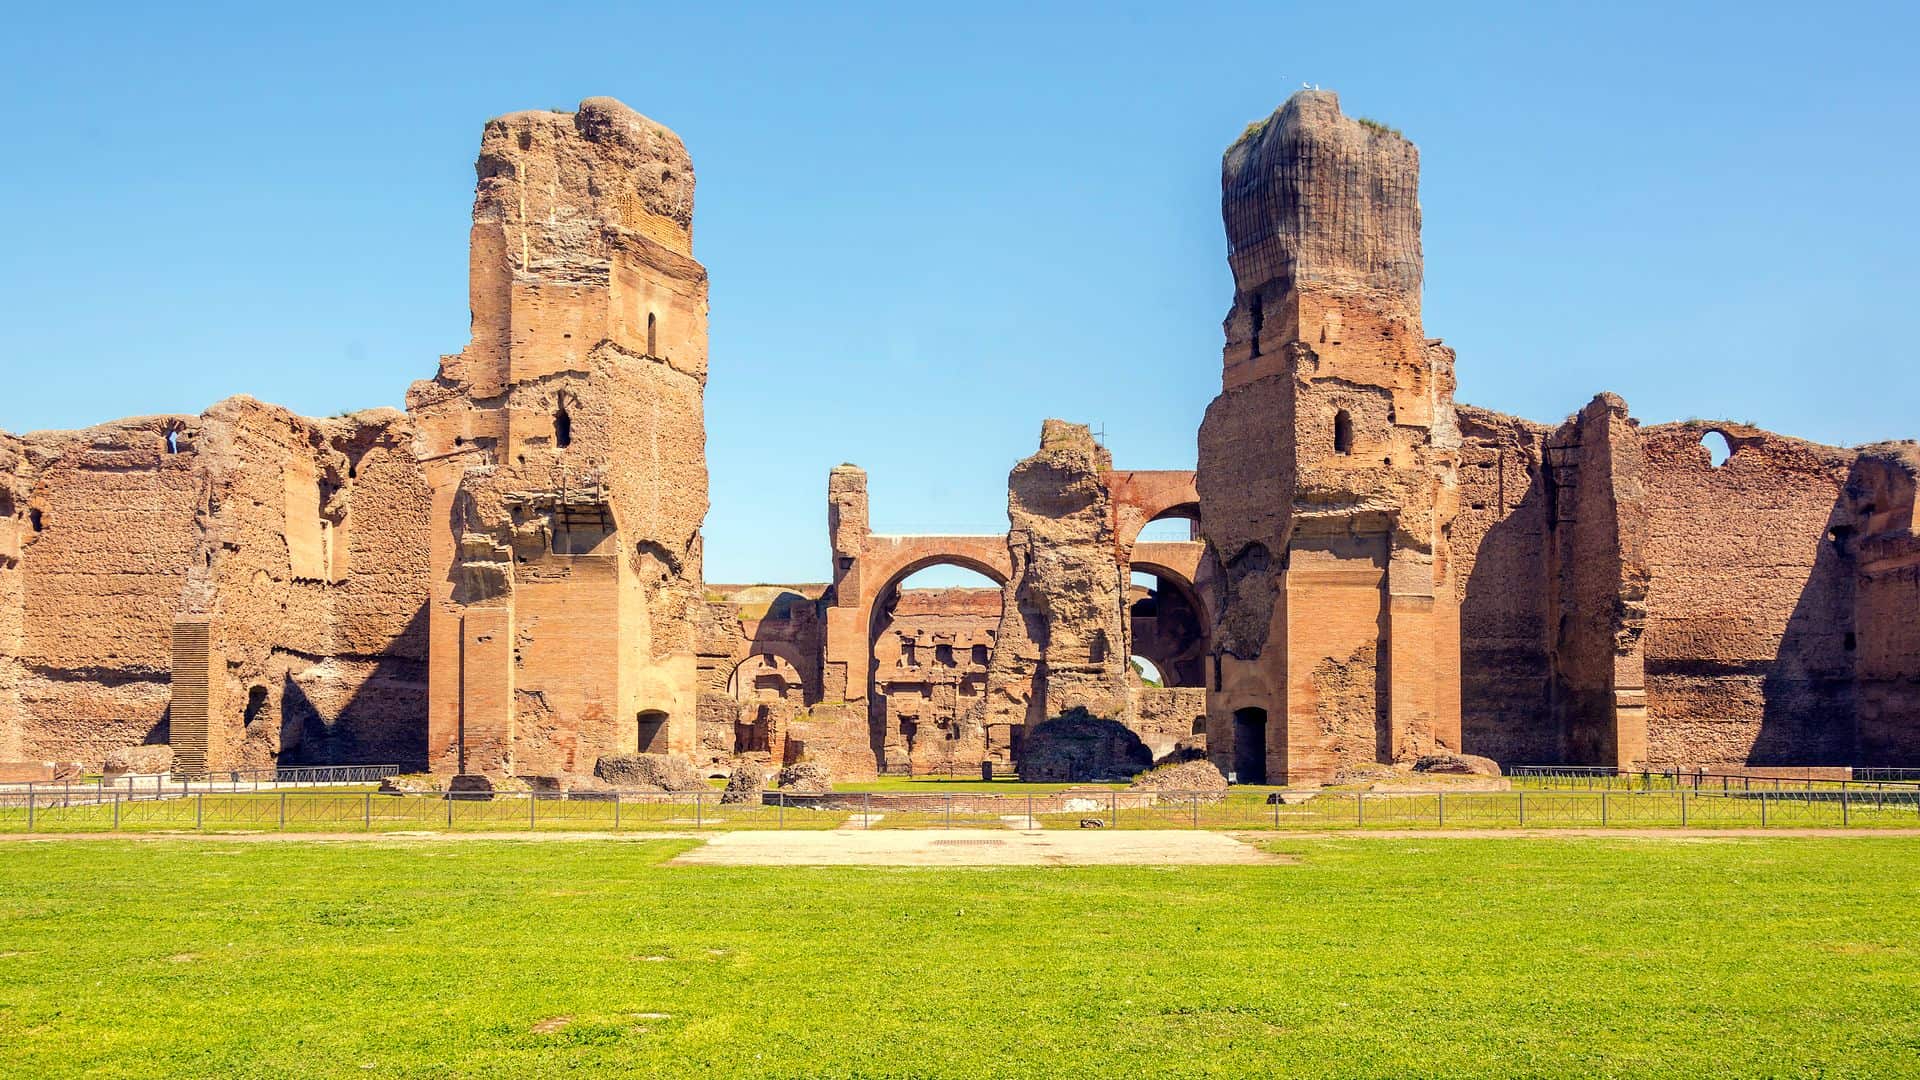 The ancient ruins of the public thermae "Baths of Caracalla"